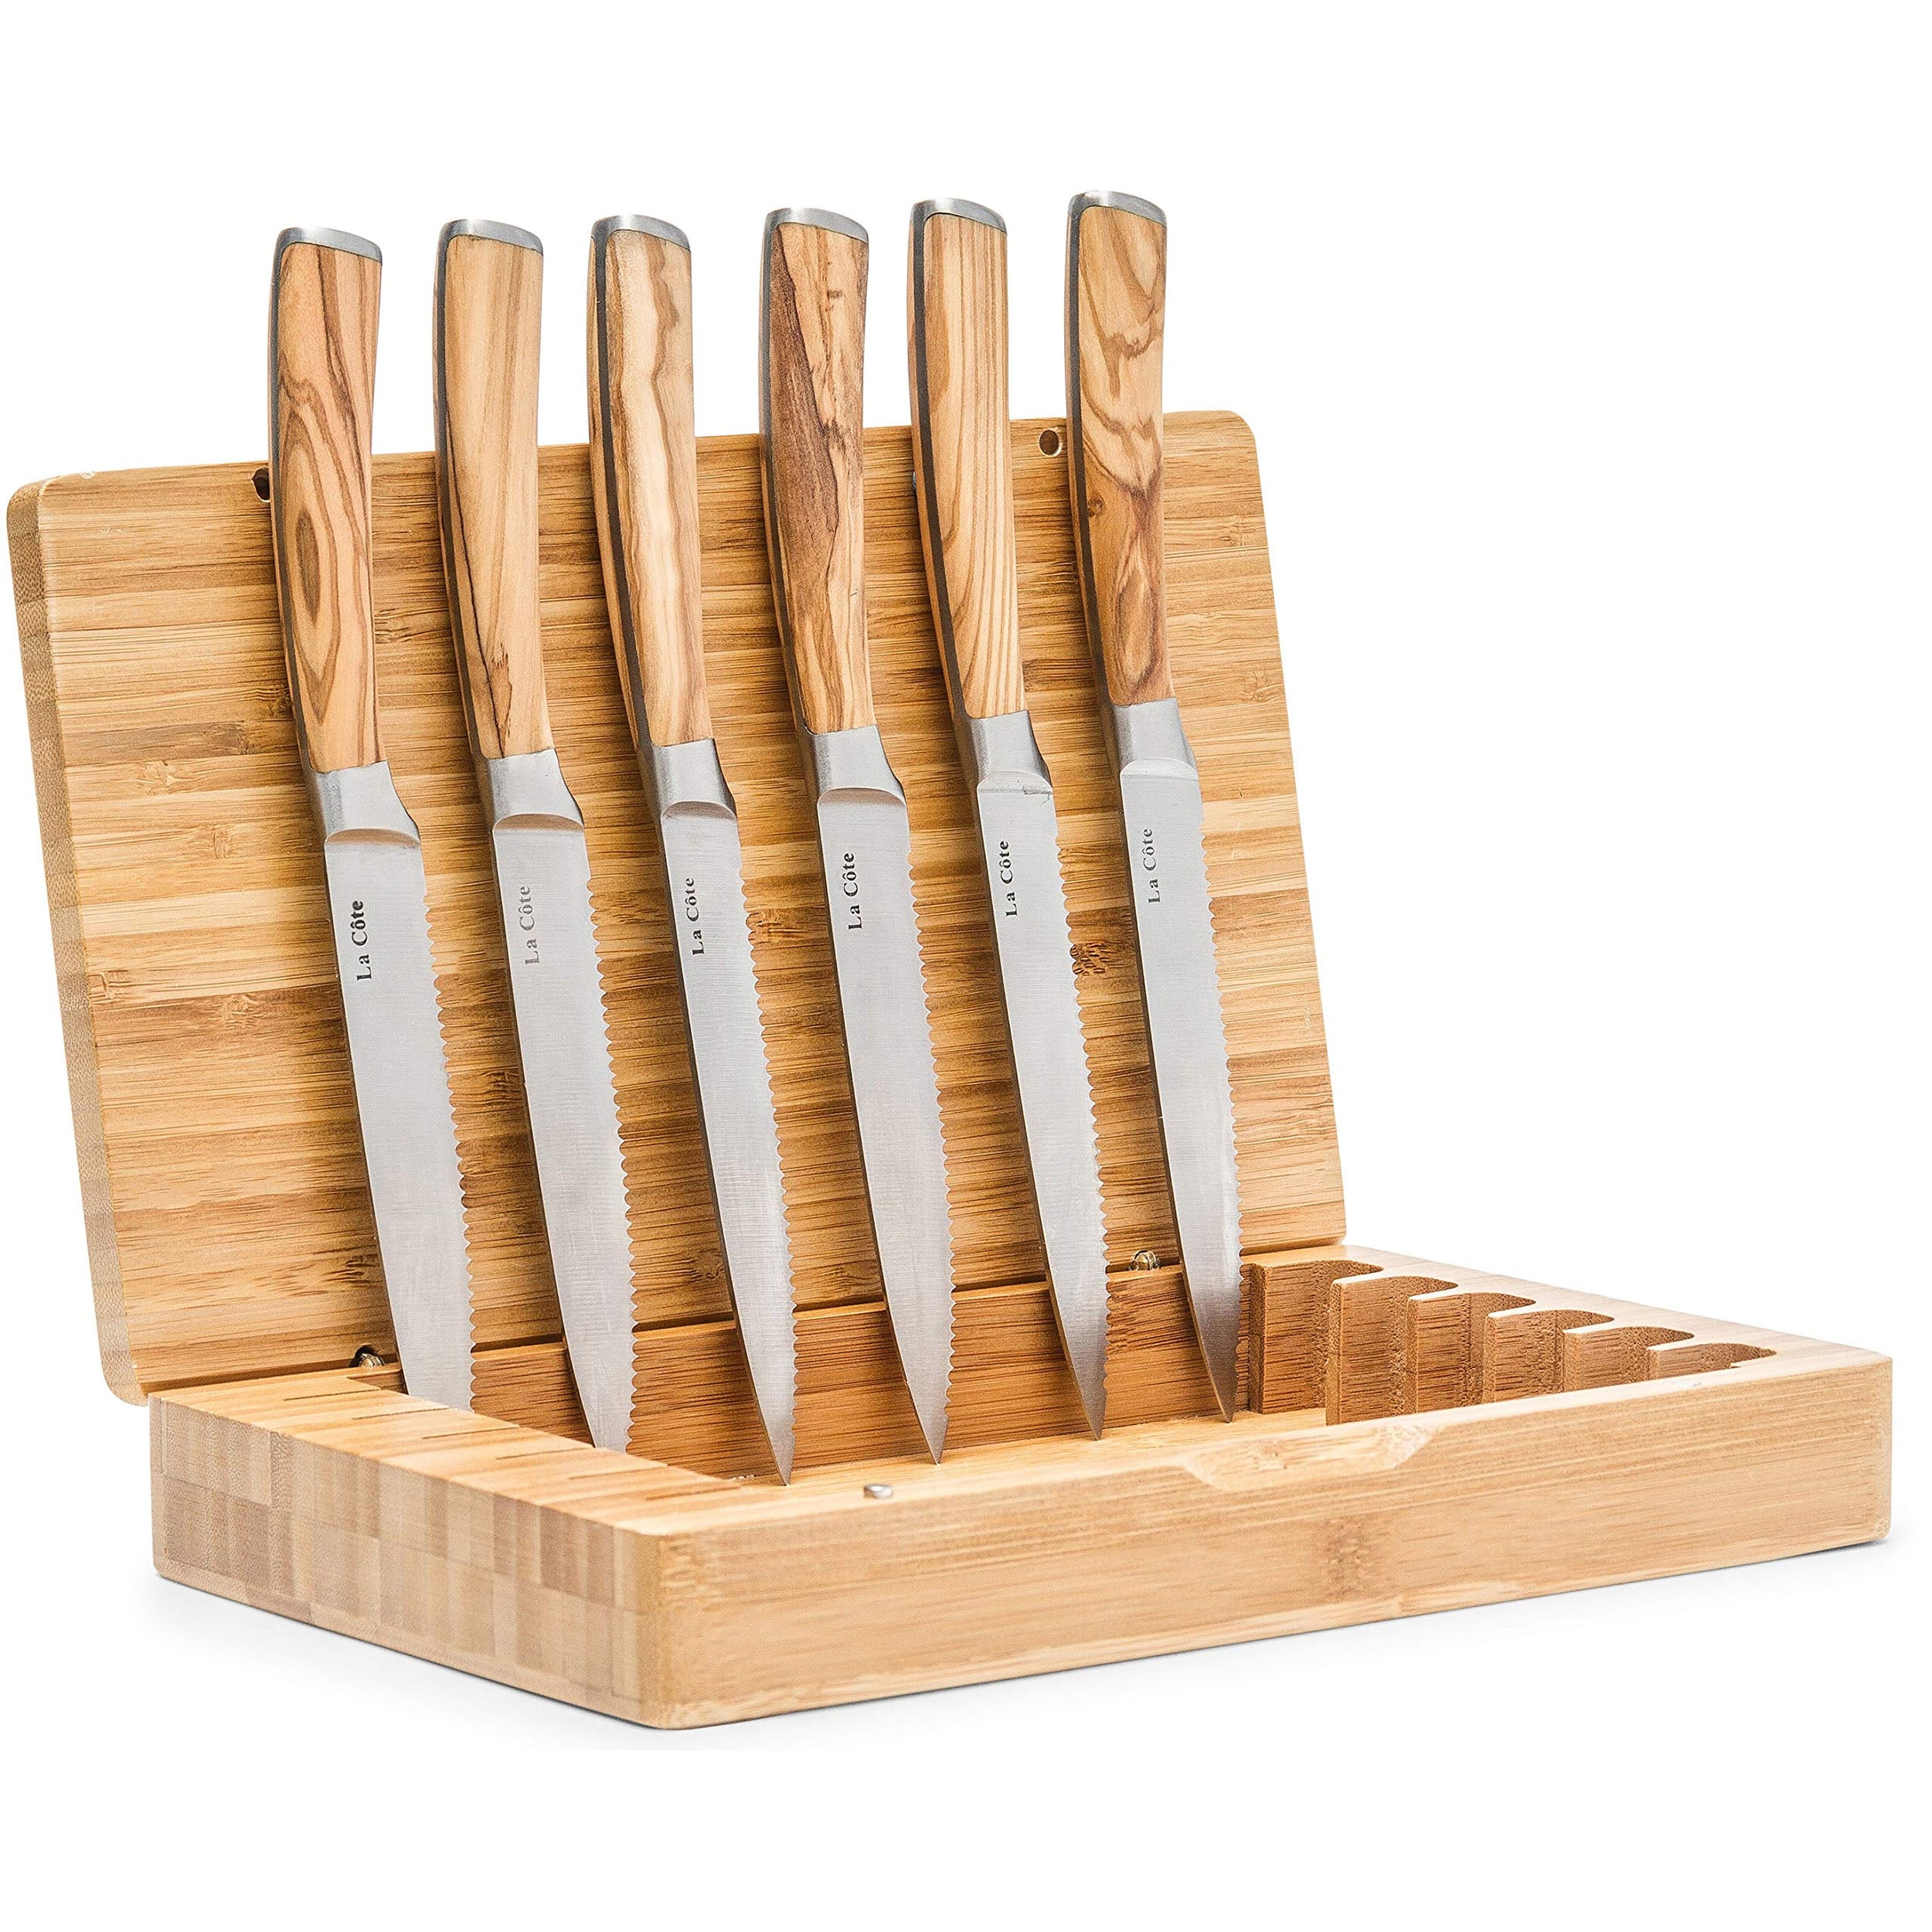 La Cote 6 Piece Steak Knives Set Japanese Stainless Steel Olive Wood Handle In Bamboo Storage Box (Olive Wood)